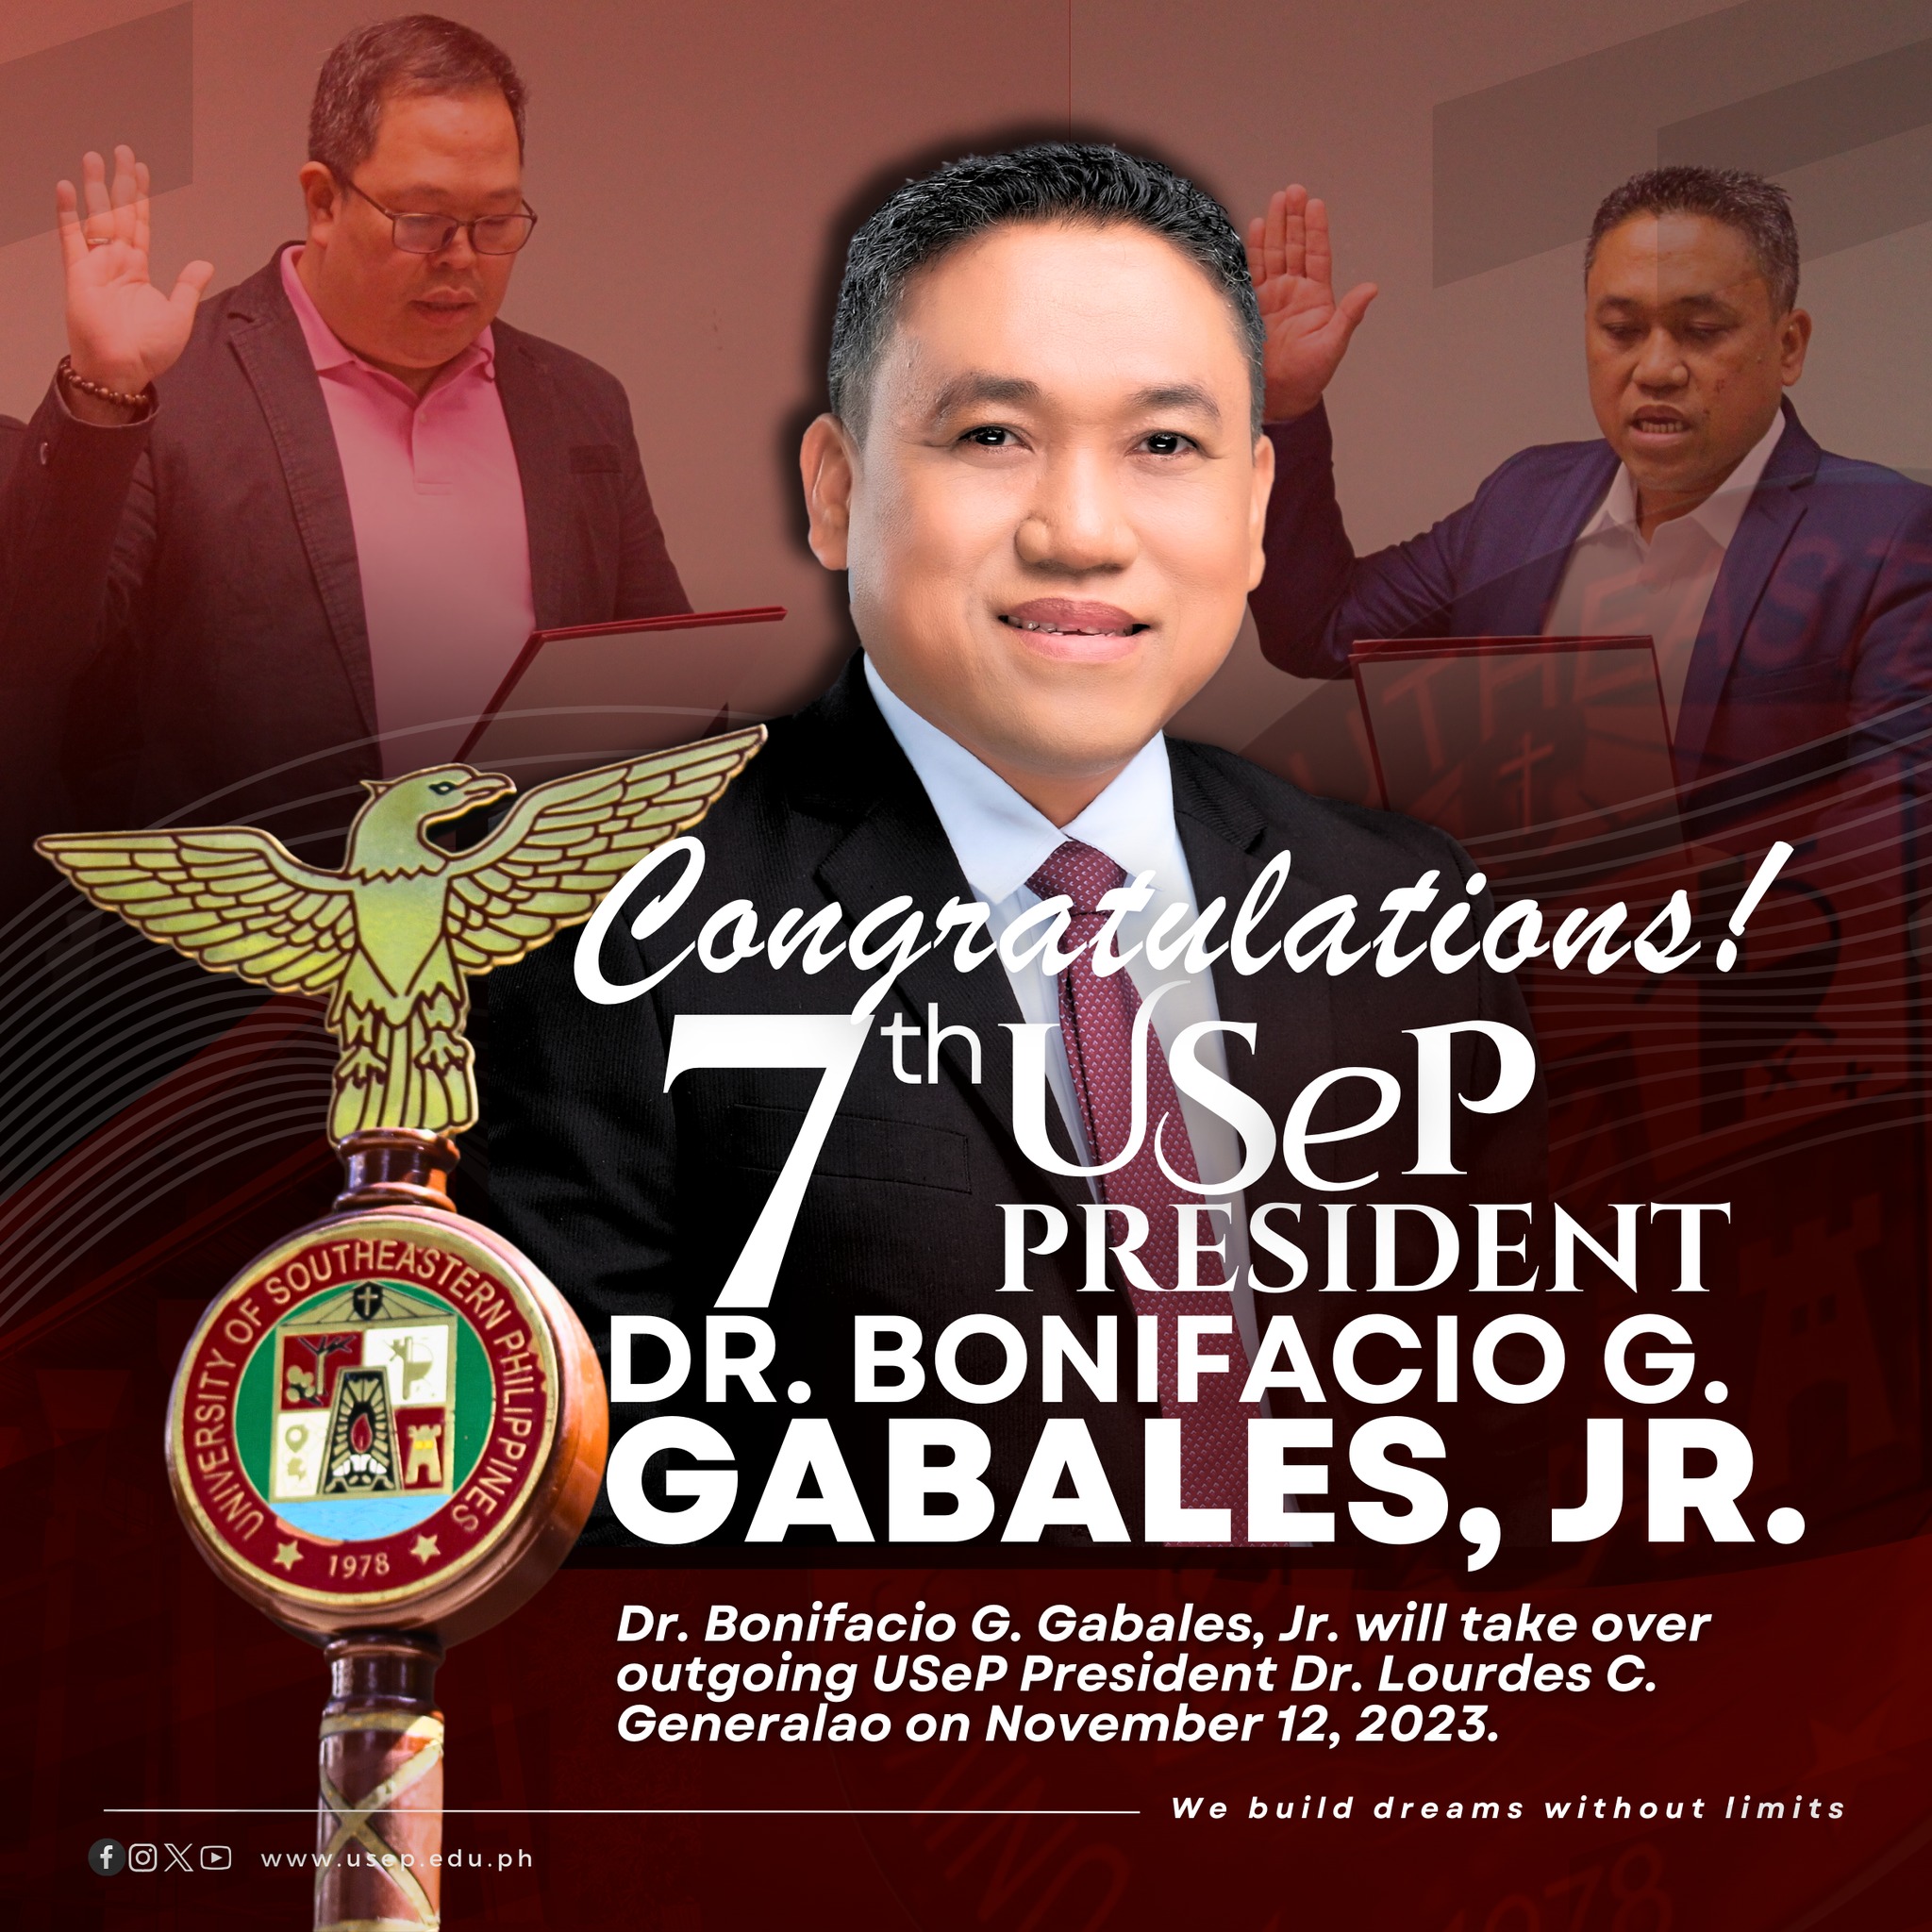 Gabales is the 7th President of USeP